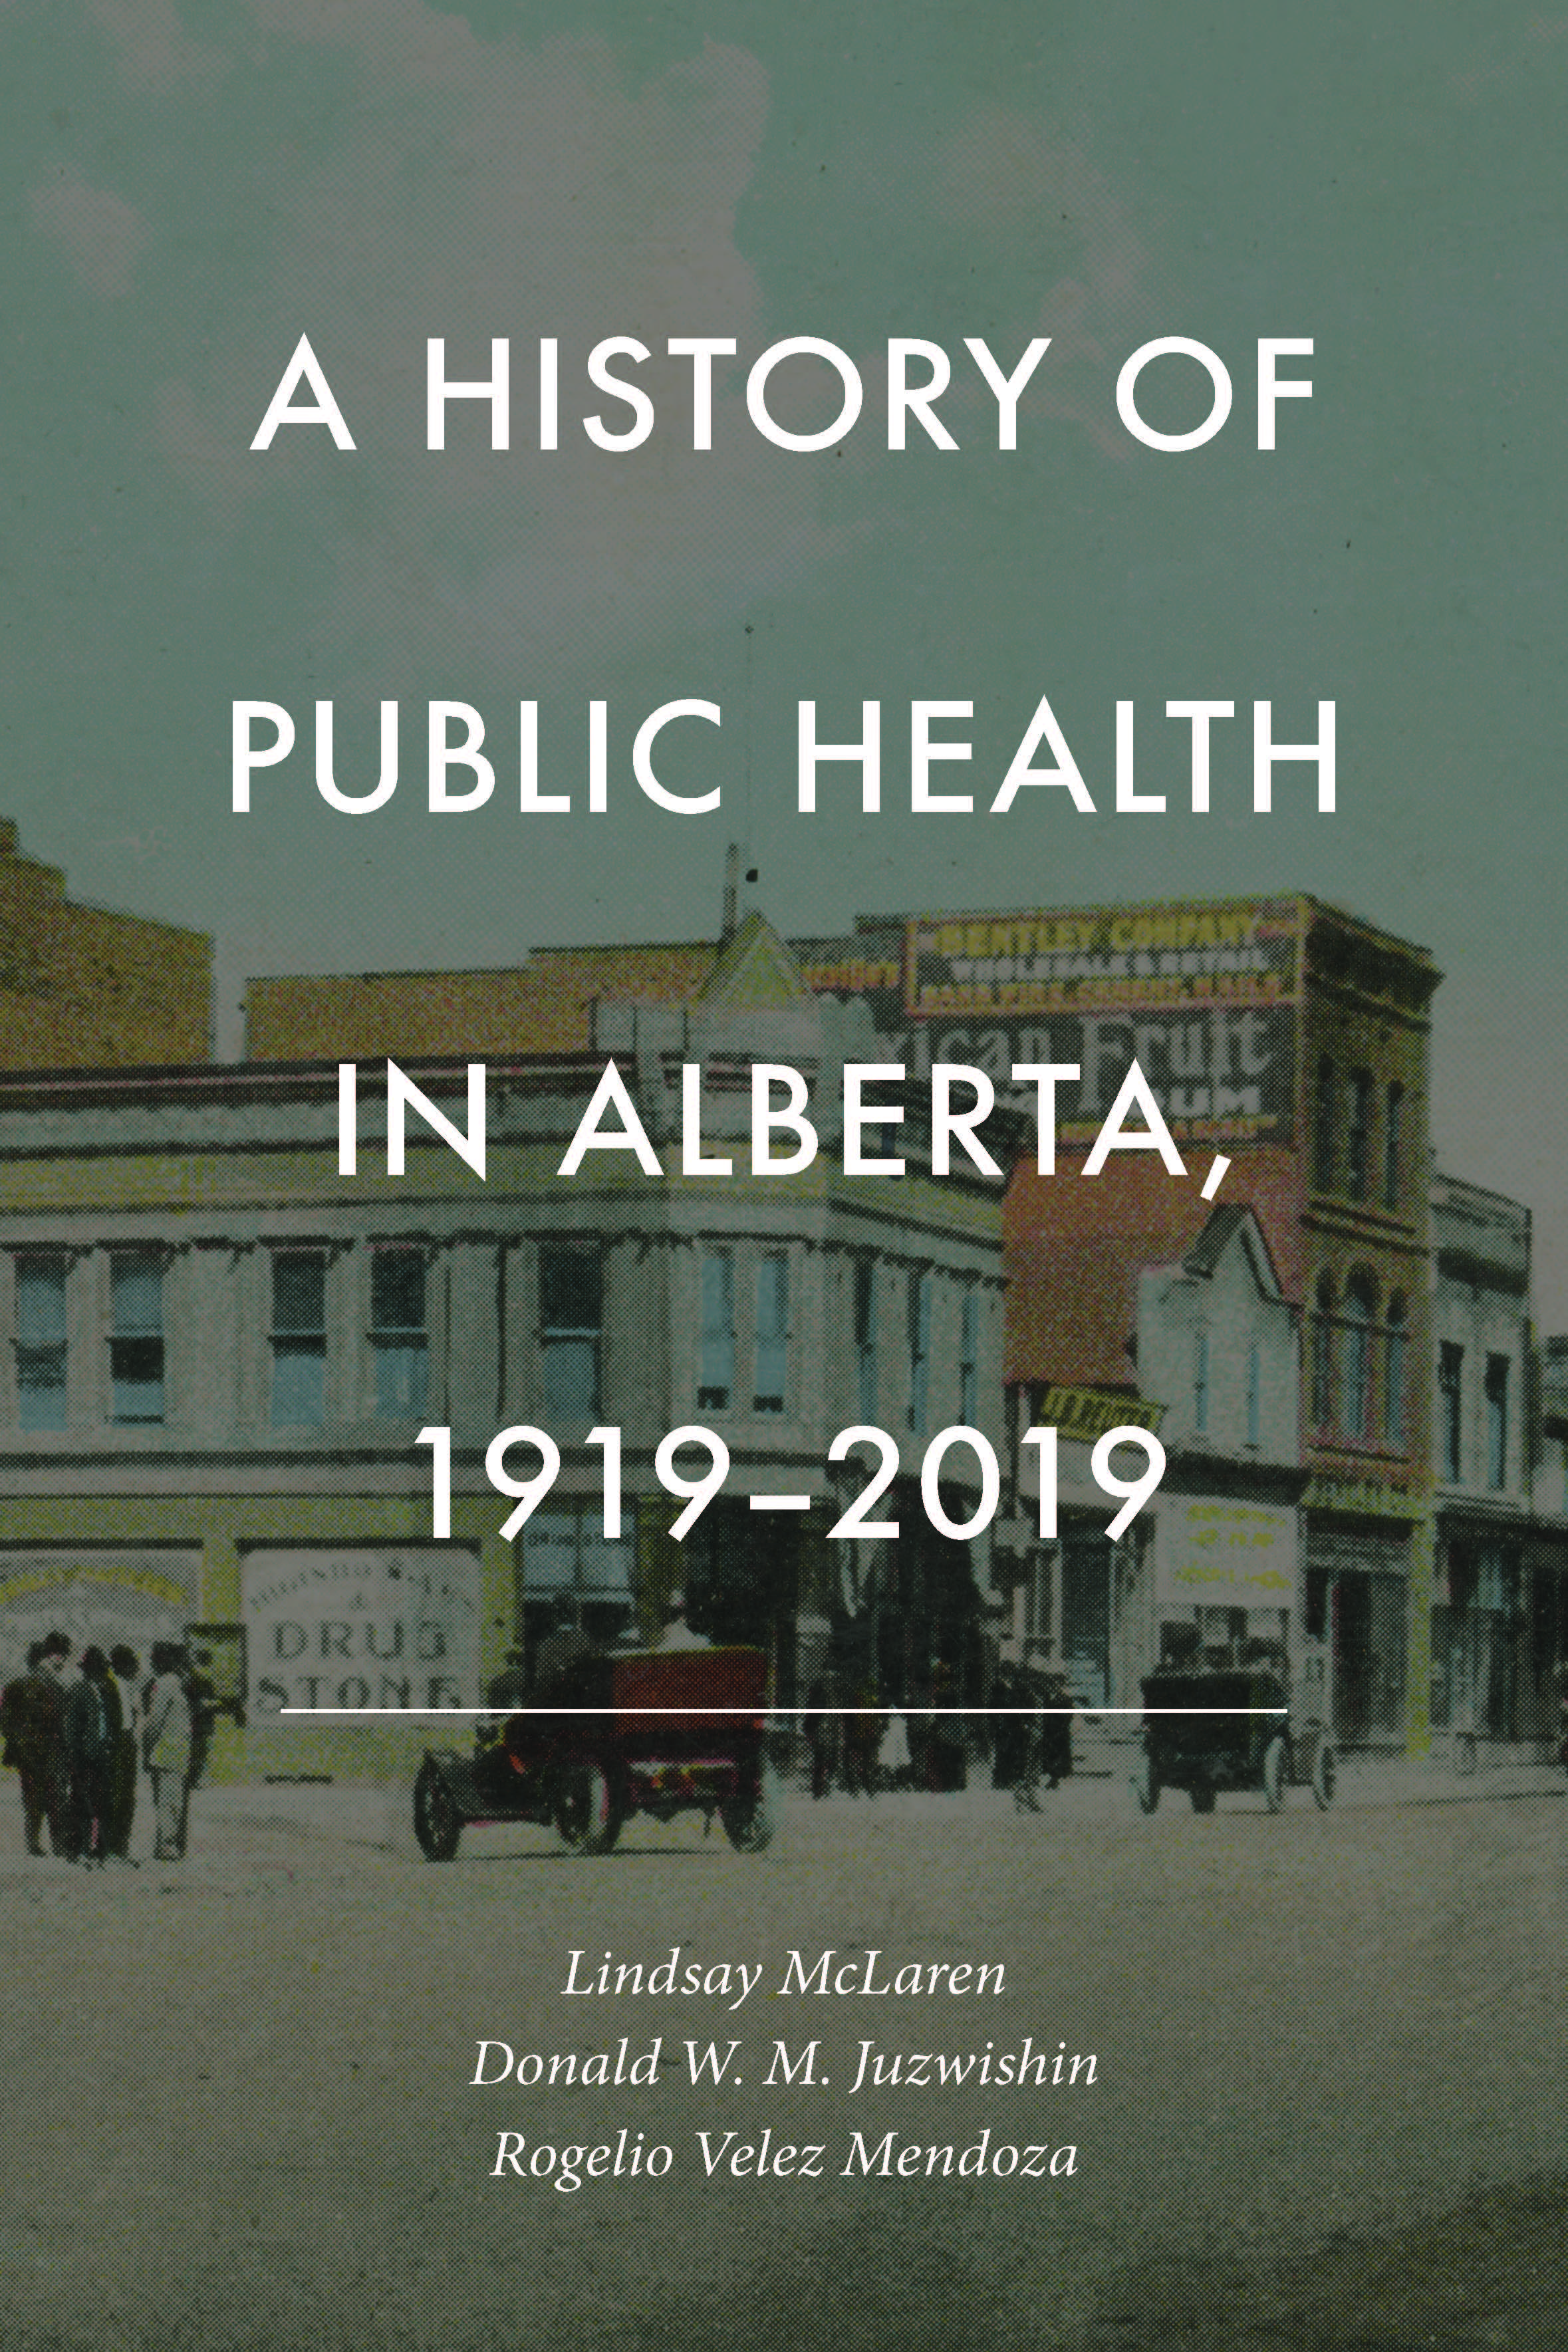 Cover Image for: History of Public Health in Alberta, 1919-2019